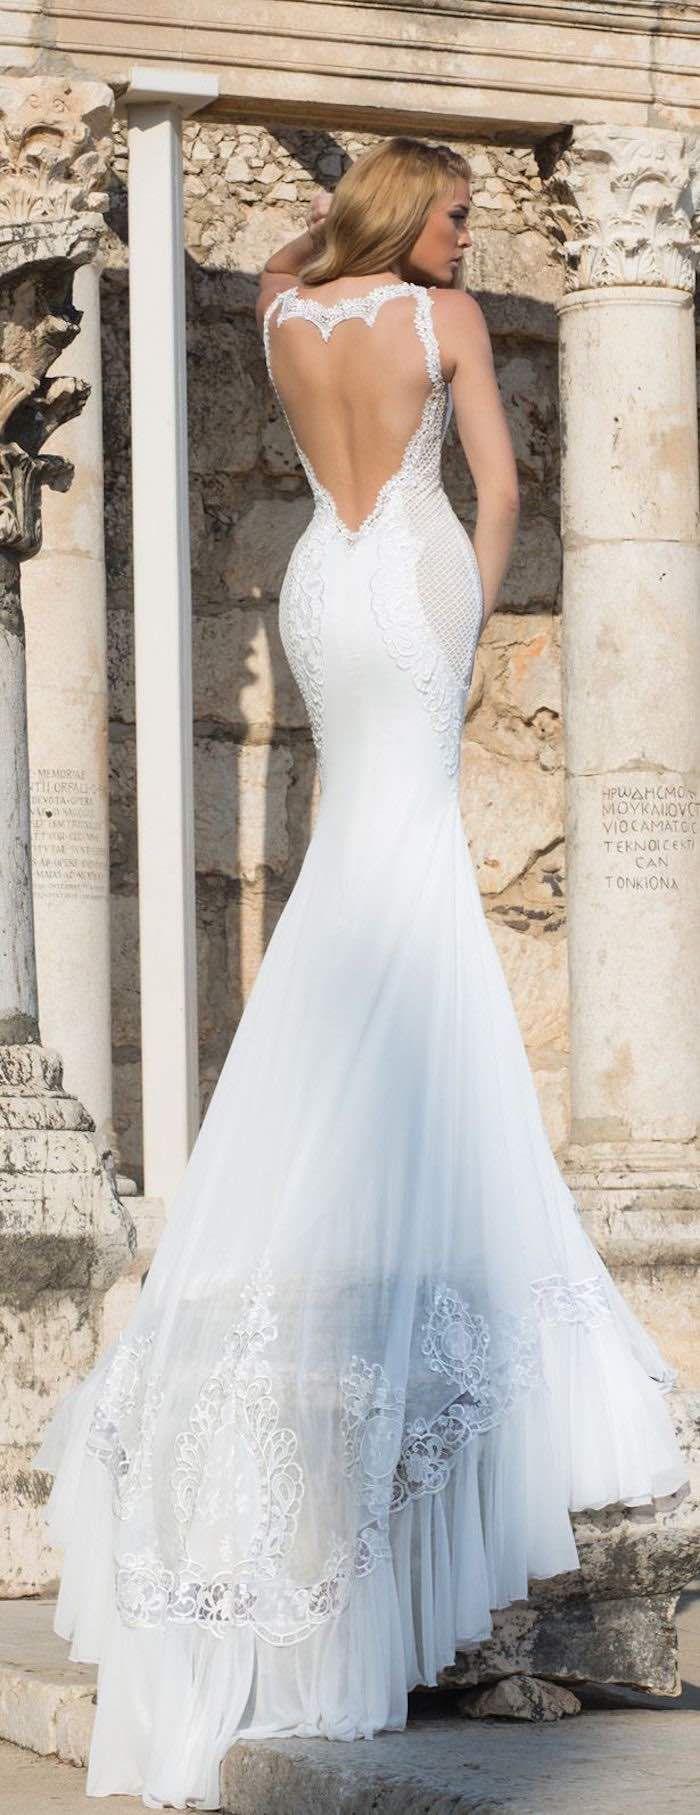 Mariage - Sexy Wedding Dresses With Hottest Details